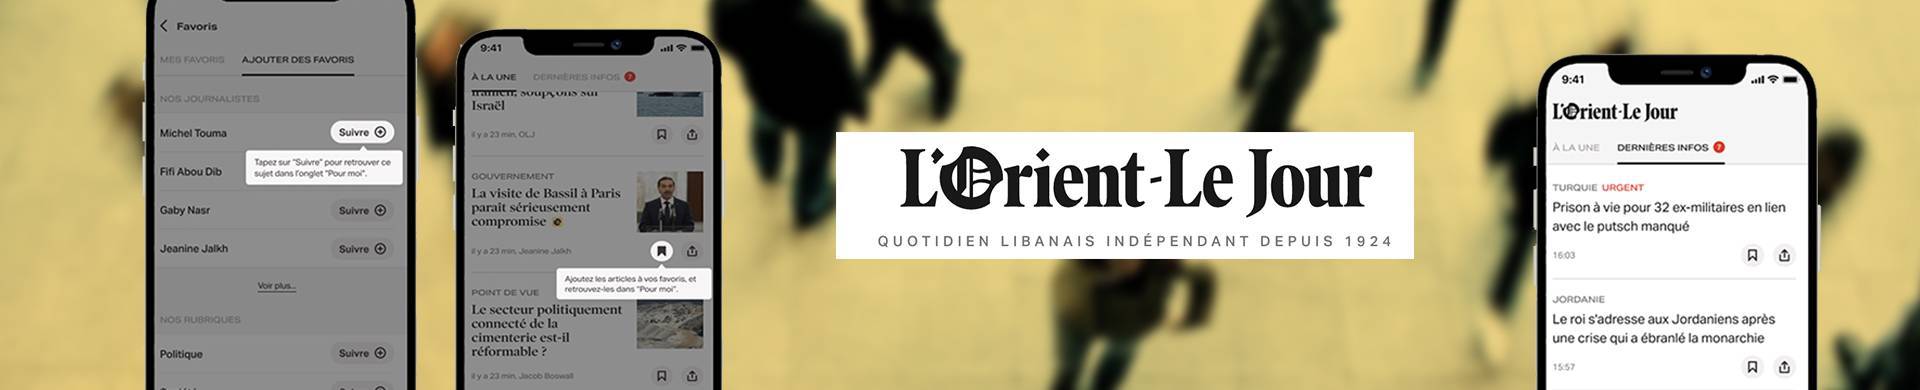 Powered by WhiteBeard News Suite, L'Orient-Le Jour's new app is launched!